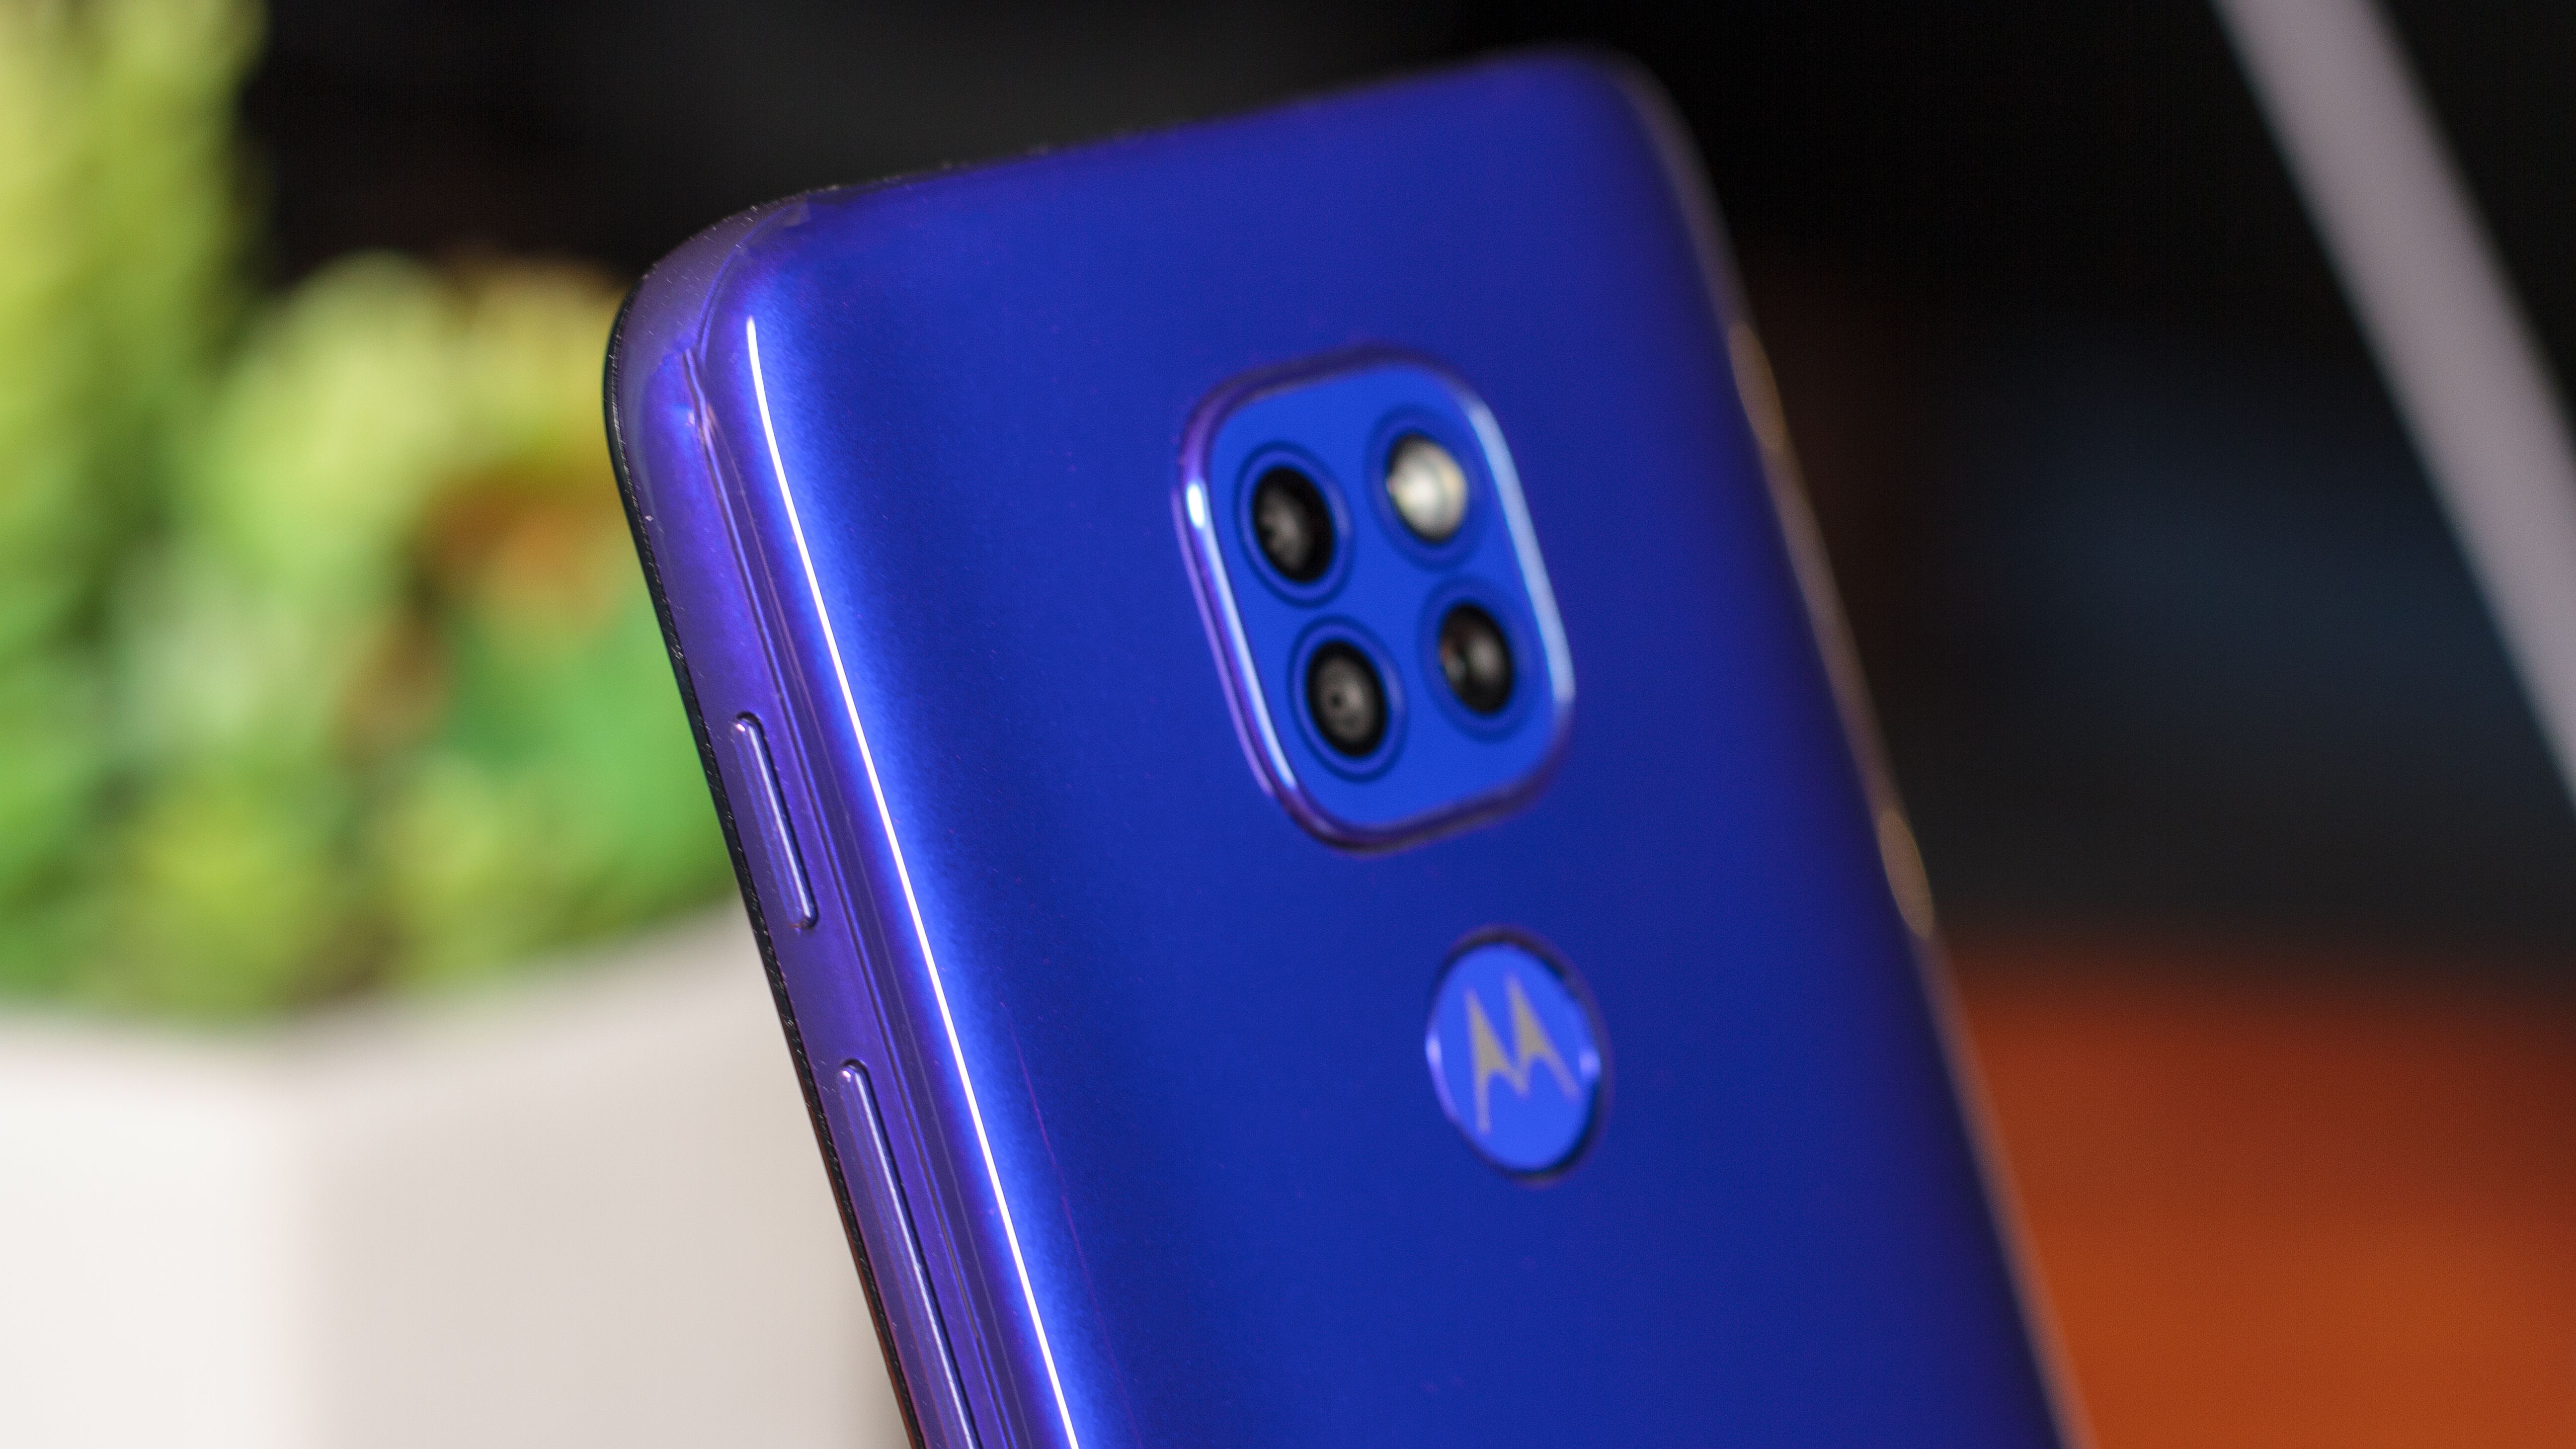 Moto G9 (Play) review -  tests